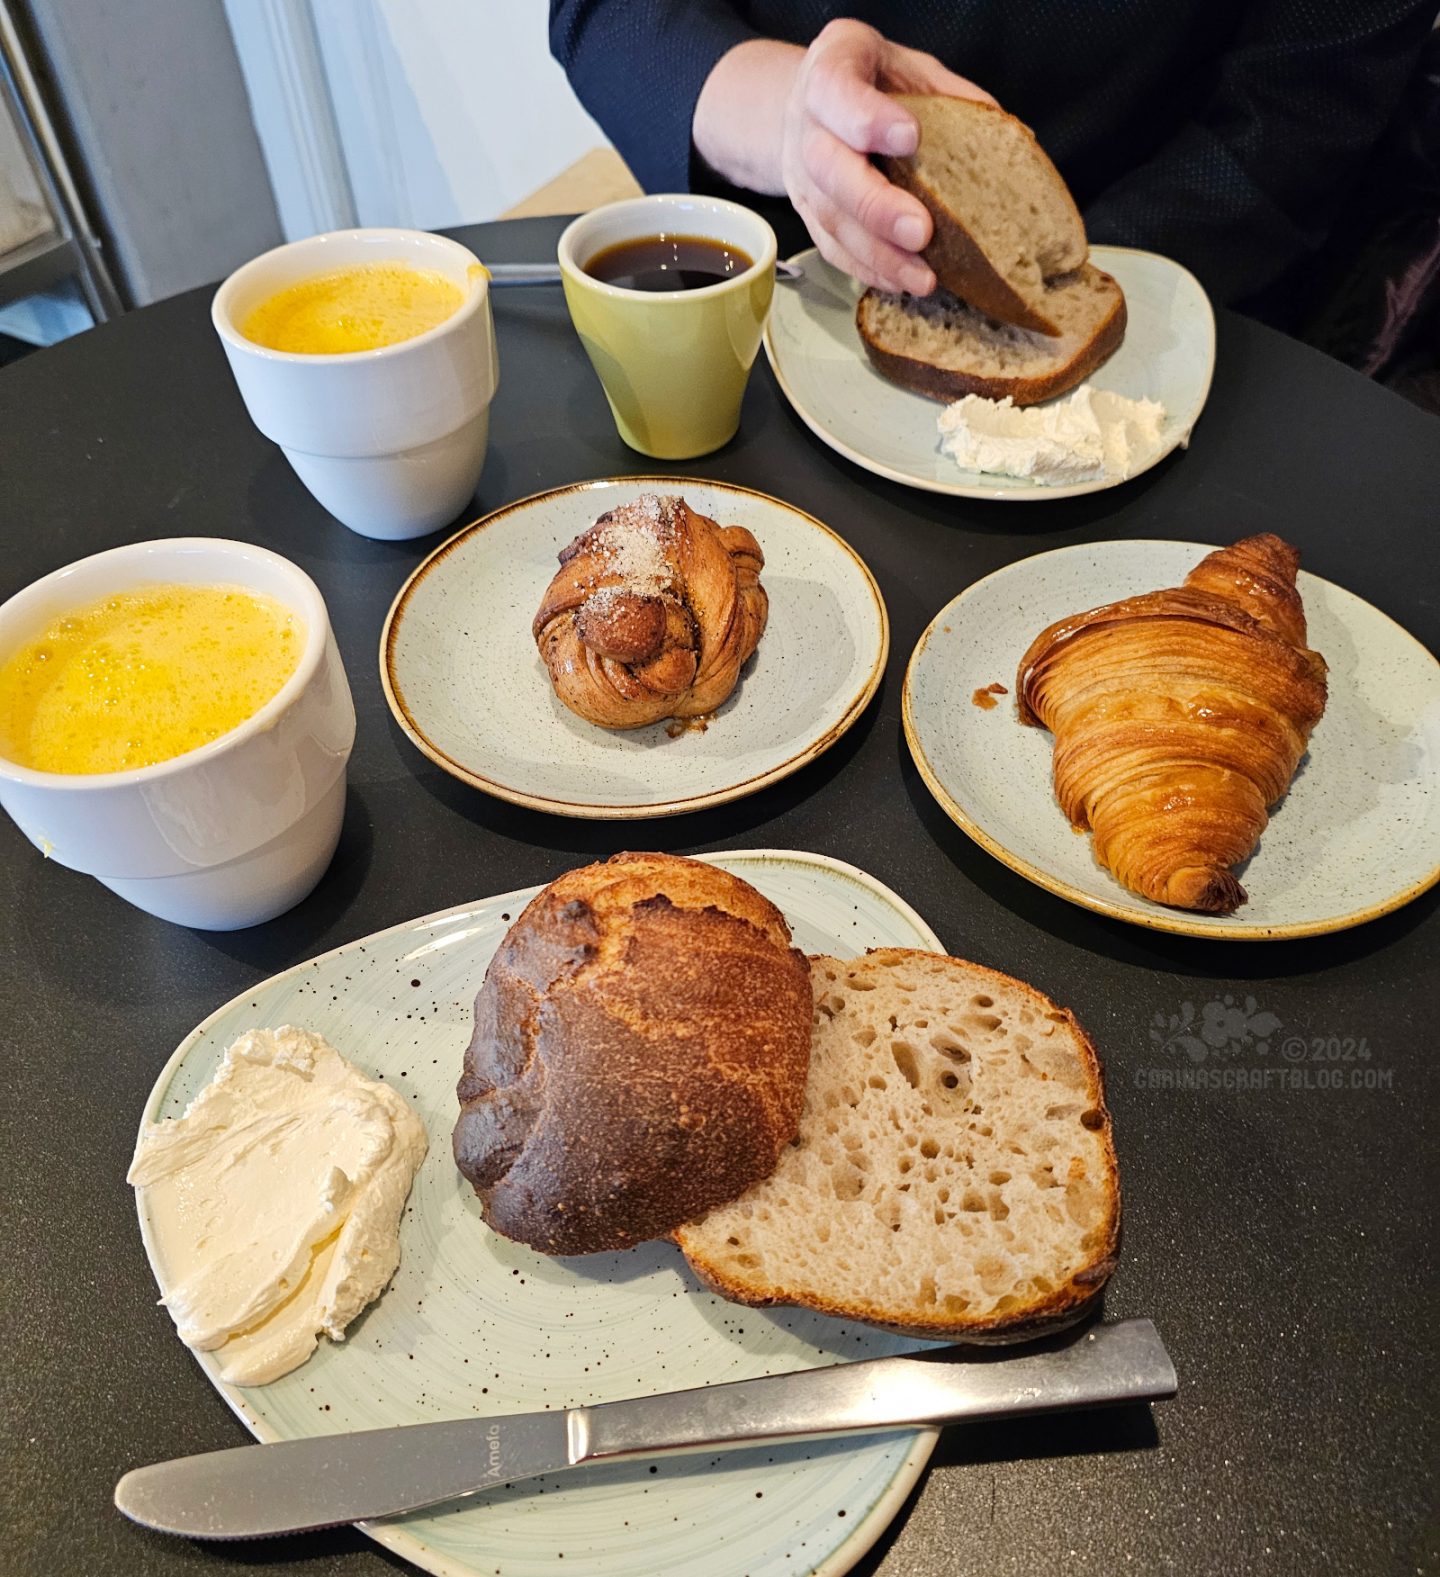 Overhead view of a table with breakfast foods: rolls, croissants and mugs of coffee and orange juice.